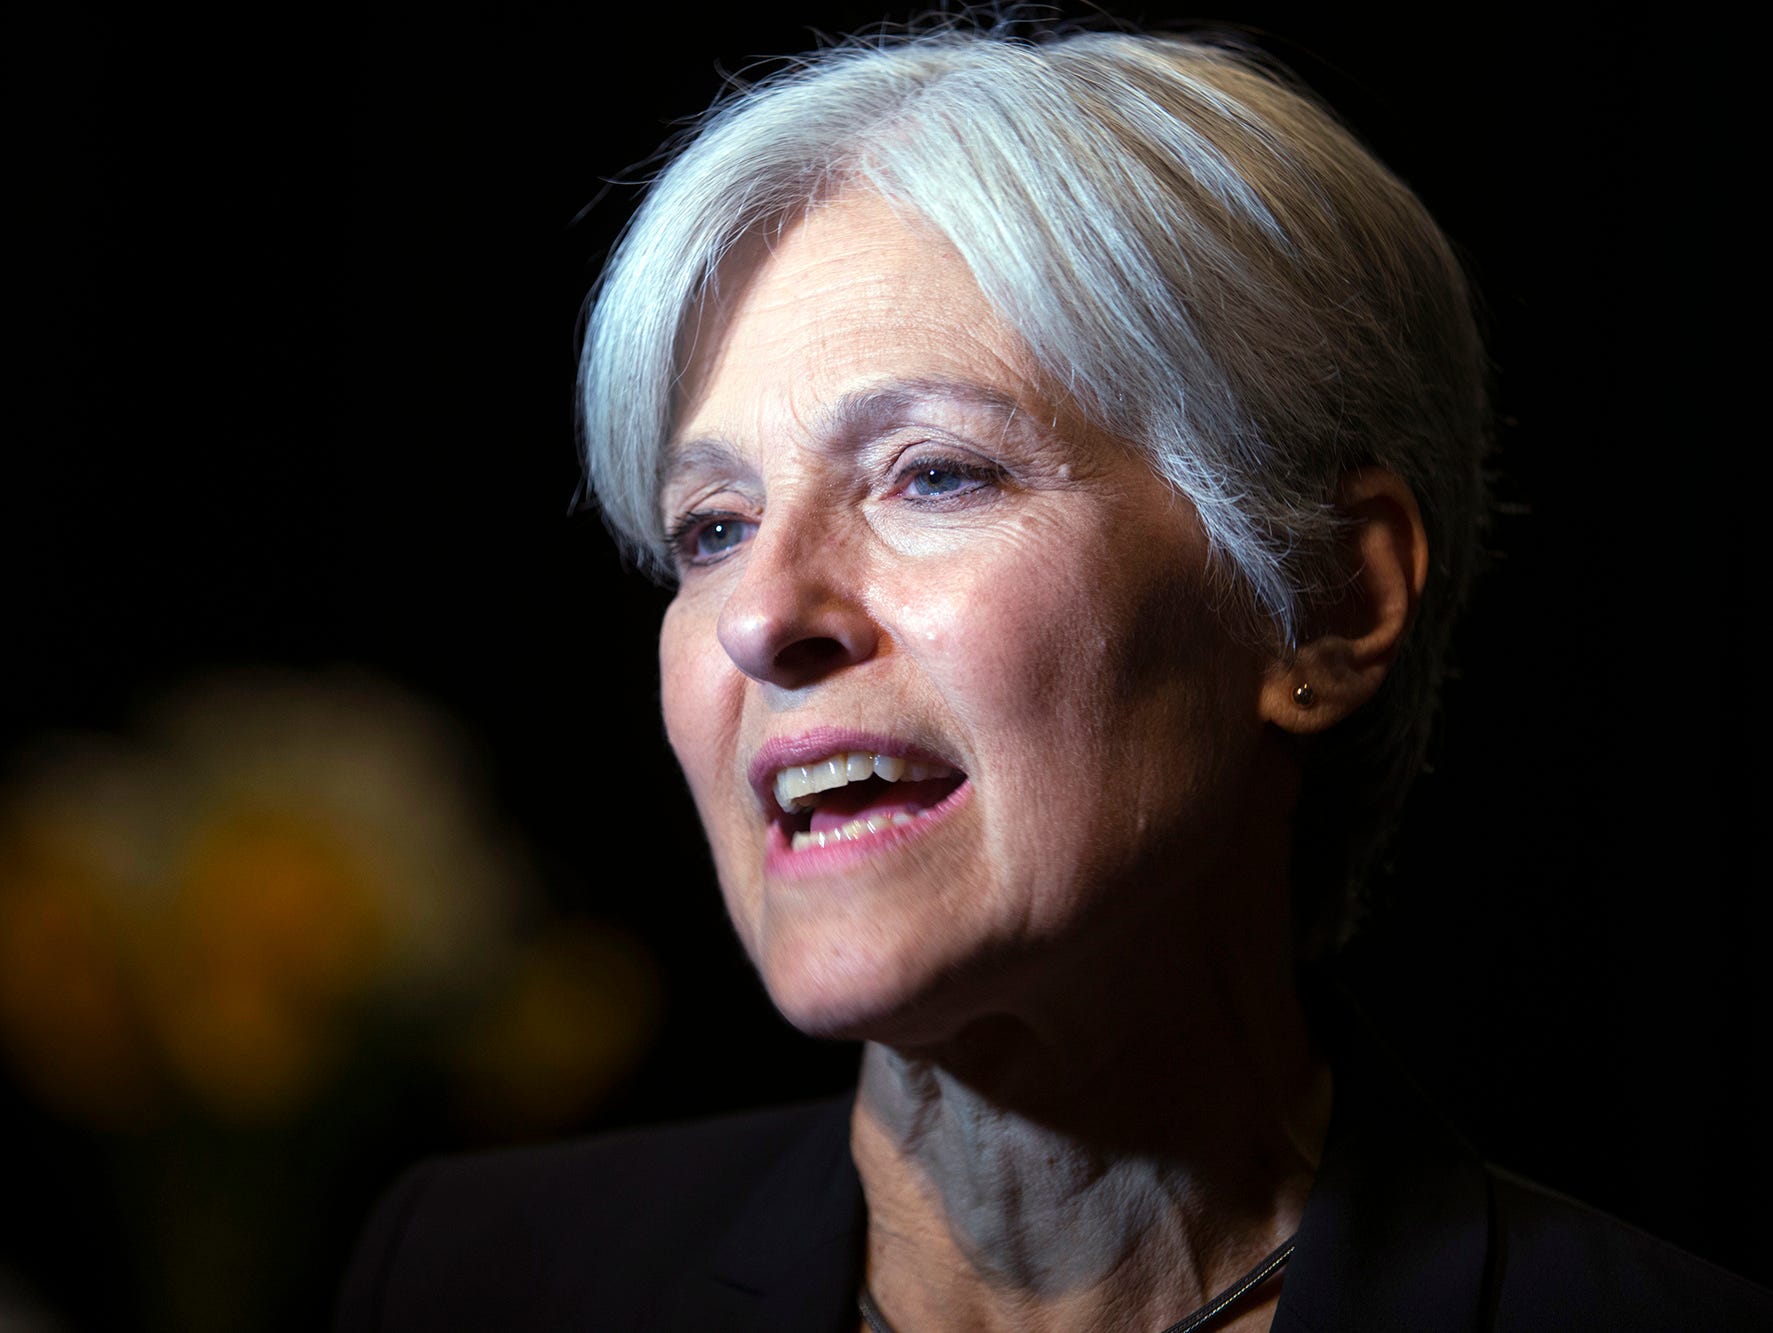 In this Oct. 6, 2016, file photo, Green party presidential candidate Jill Stein meets her supporters during a campaign stop at Humanist Hall in Oakland, Calif. A federal judge early on the morning of Monday, Dec. 5, 2016, ordered a recount of Michiga